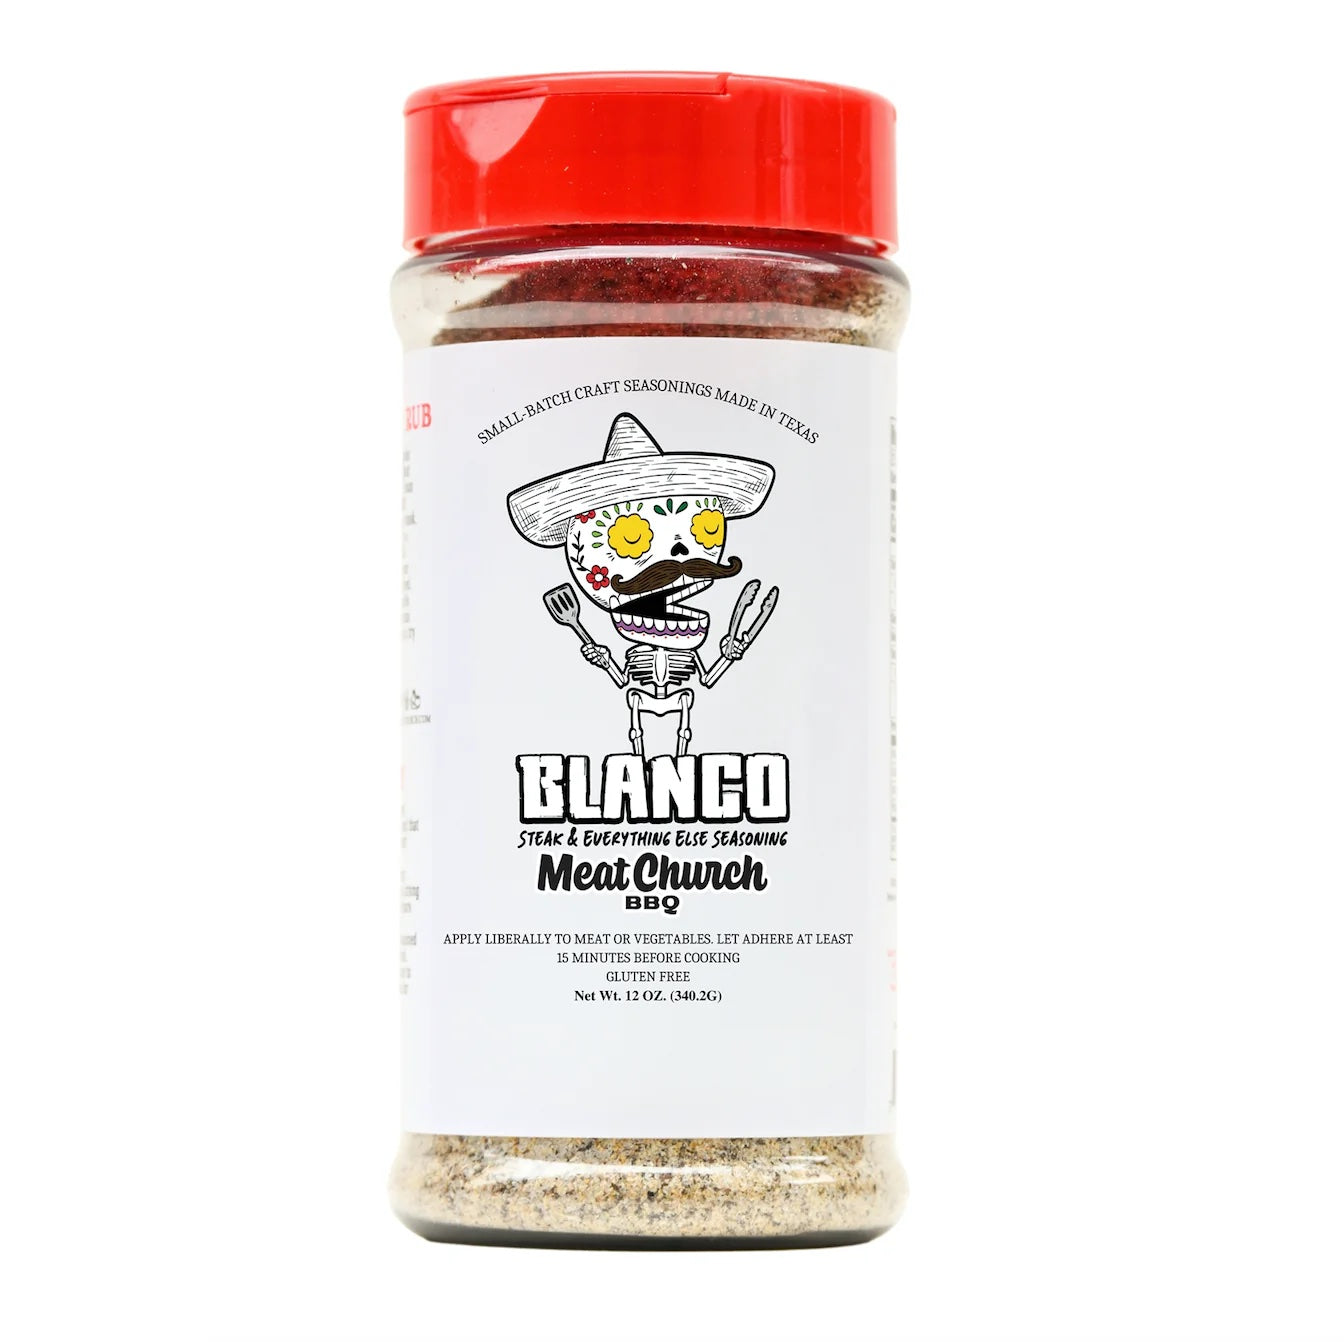 A 12-ounce jar of Meat Church Blanco Steak & Everything Else Seasoning. The label is white with black text and features a cartoon skeleton wearing a sombrero, holding grilling tools. The seasoning is a mix of coarse spices.